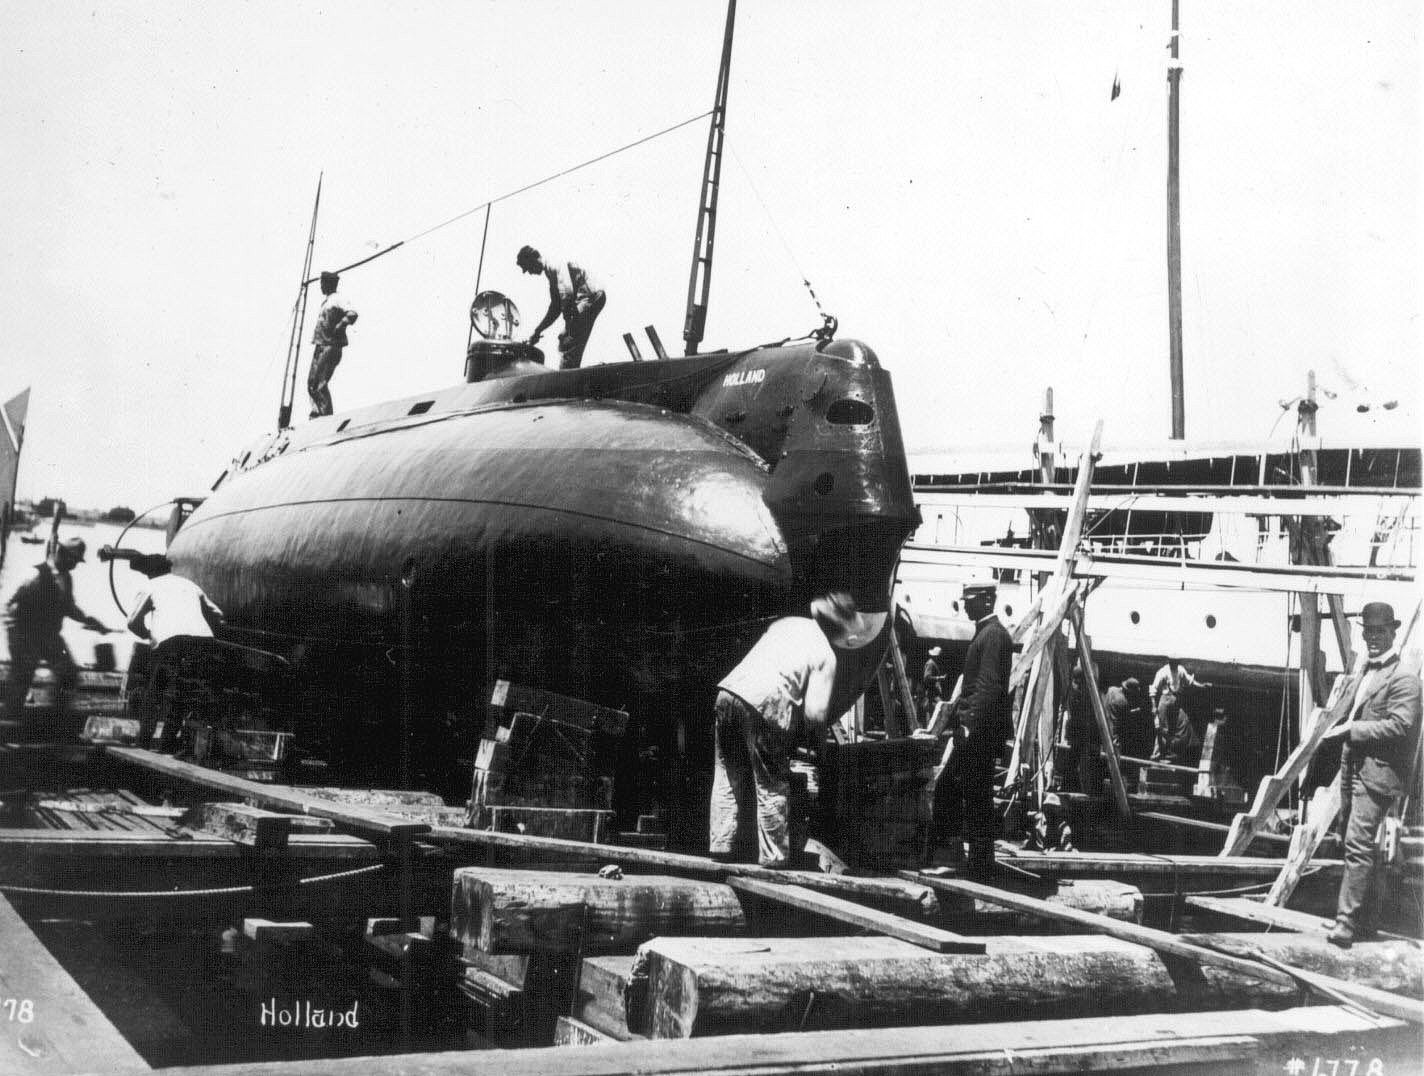 Launched in 1897 and commissioned in 1900, USS Holland was the U.S. Navy’s first submarine. Theodore Roosevelt was an early admirer.